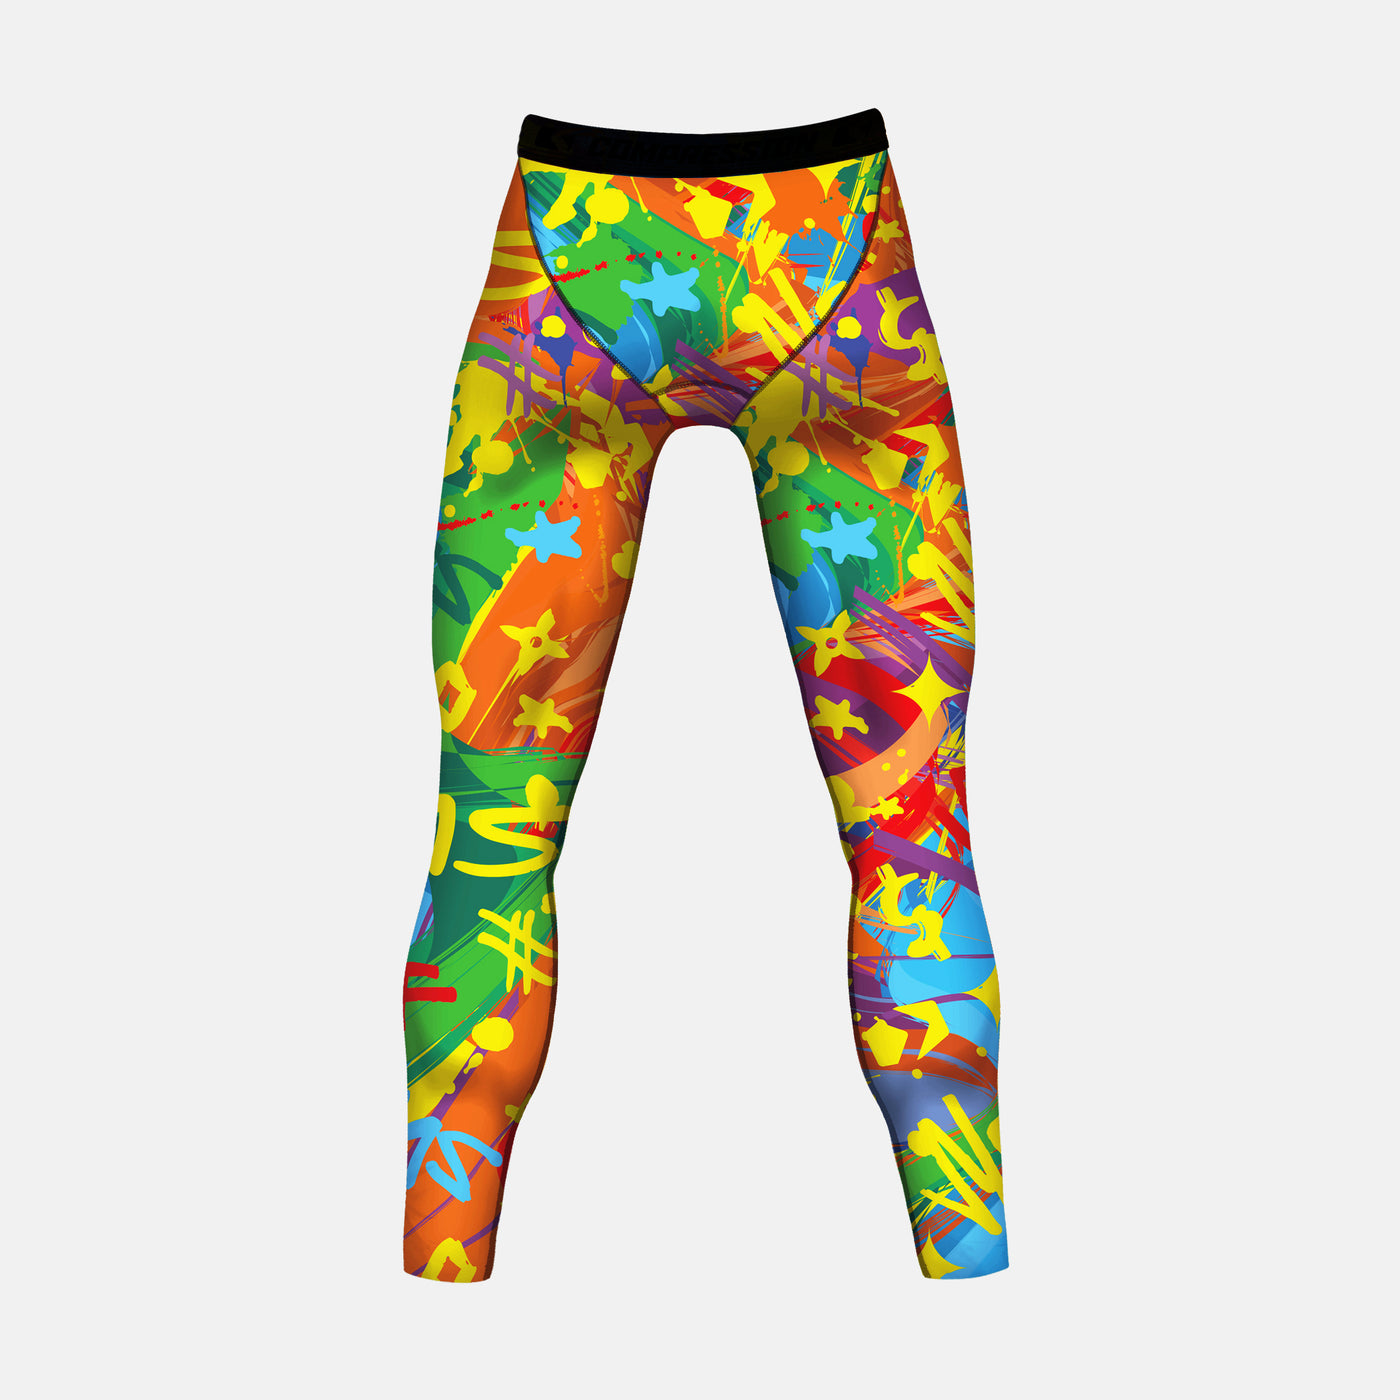 SLF Milan Colorful Tights for Men